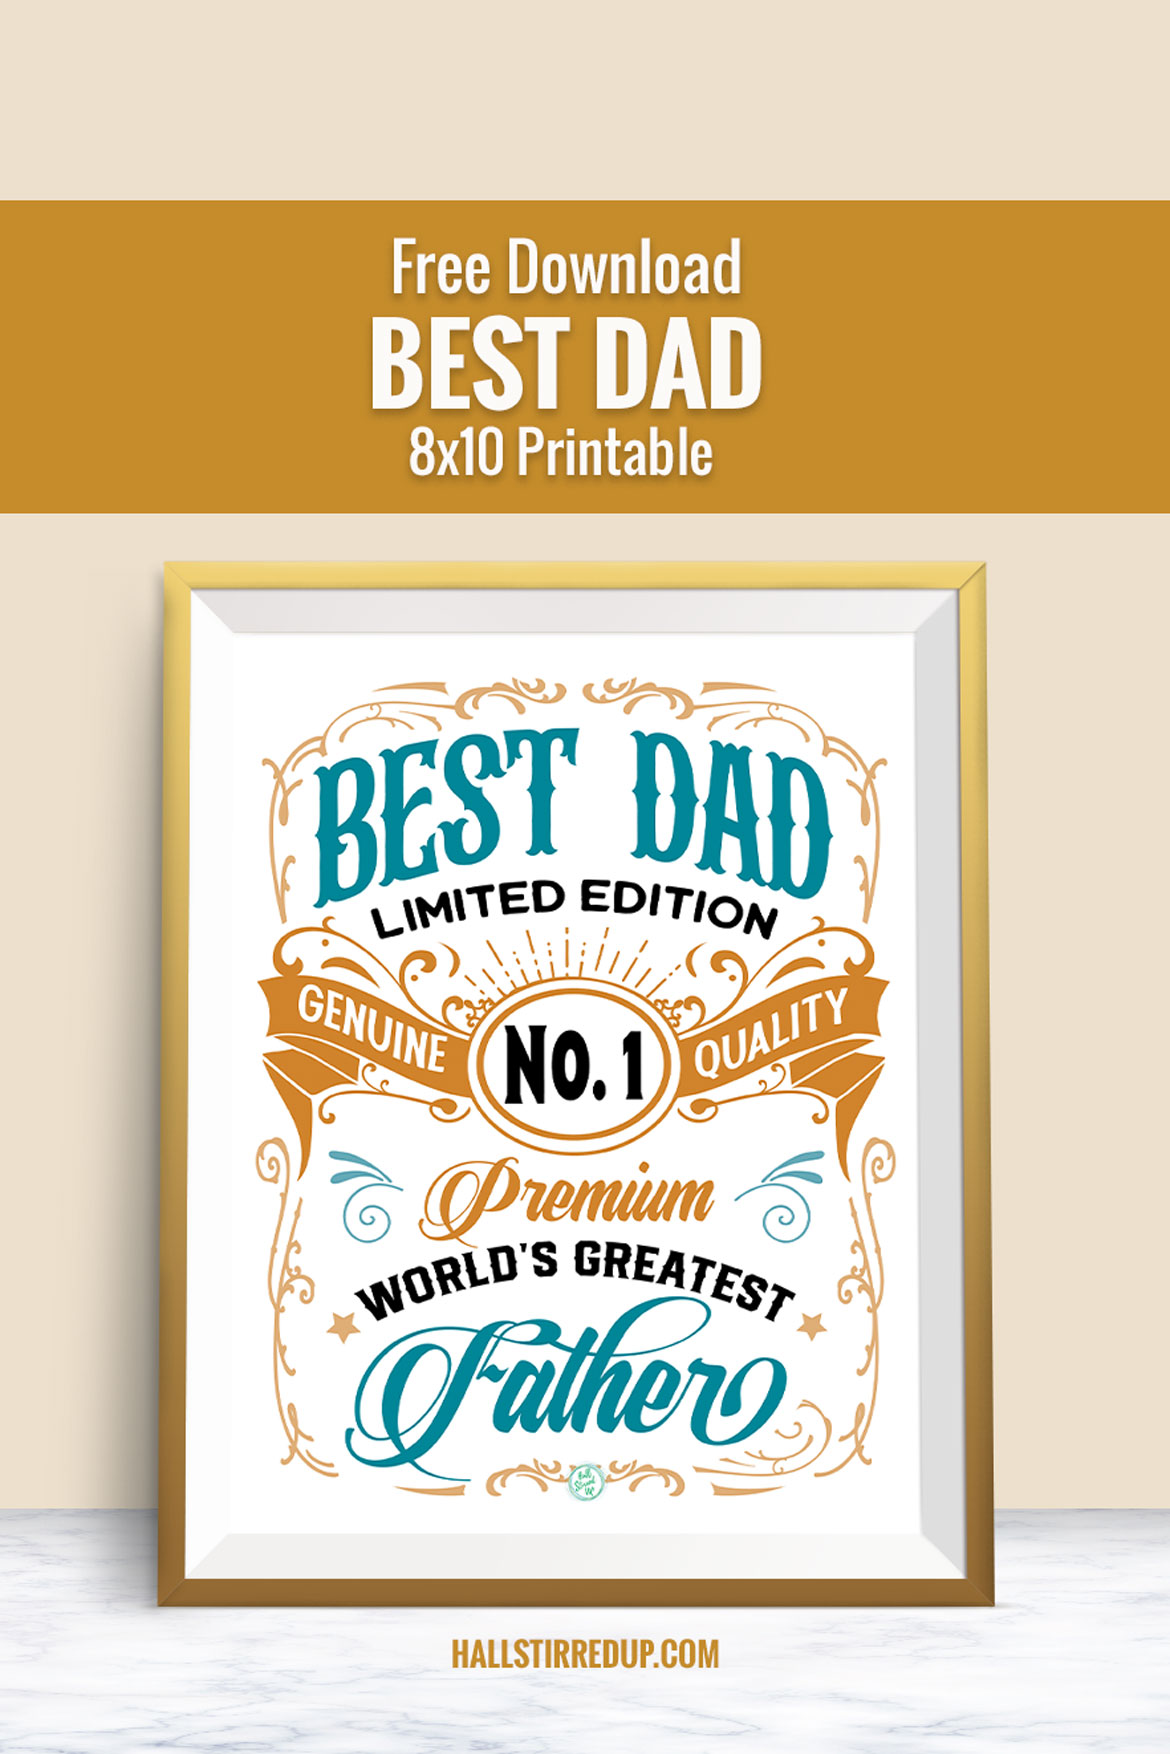 Your dad is the greatest and deserves a printable award